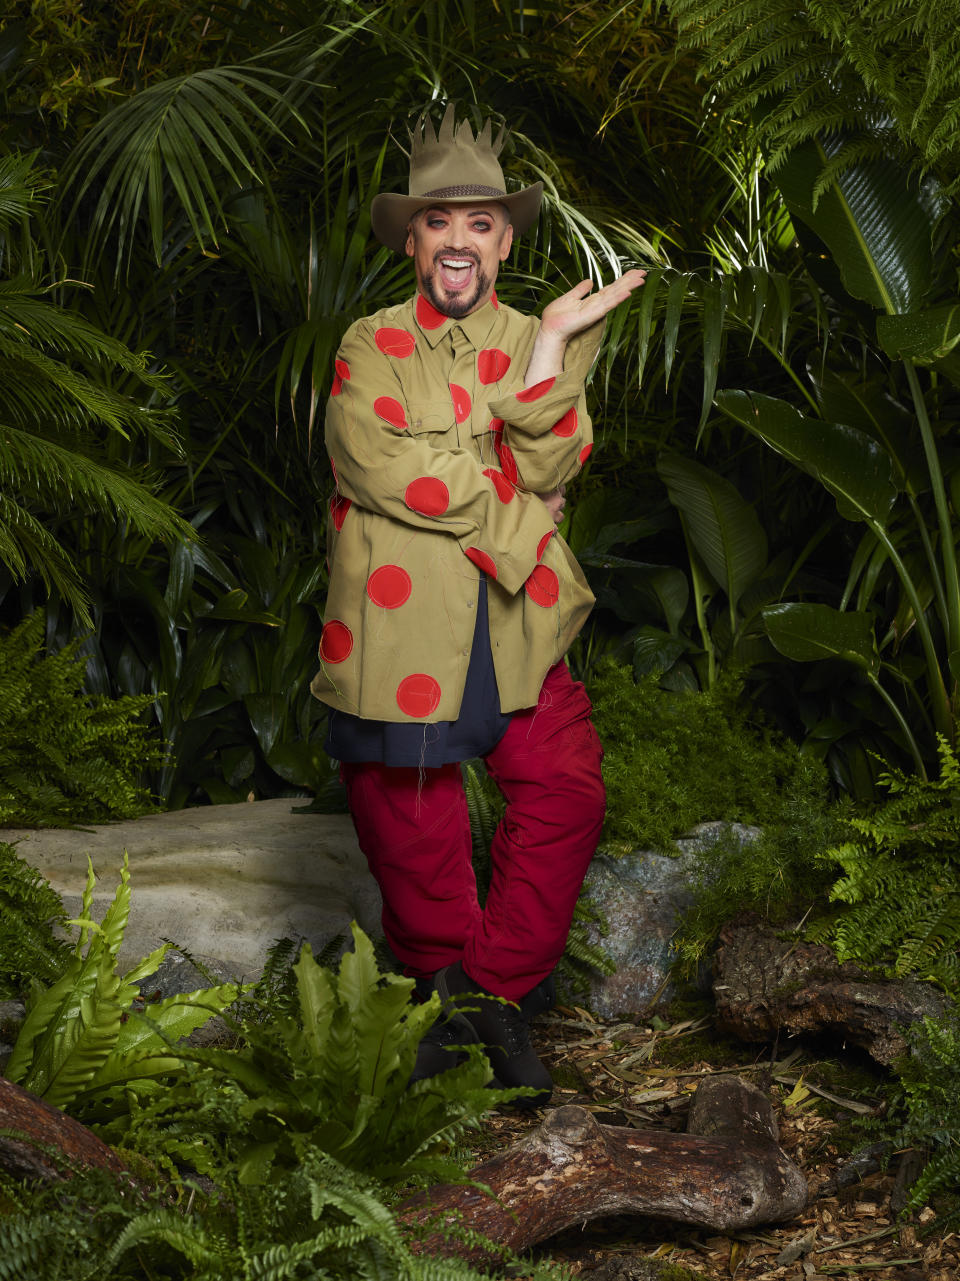 Boy George - I'm a Celebrity... Get Me Out of Here 2022 (ITV/Lifted Entertainment)